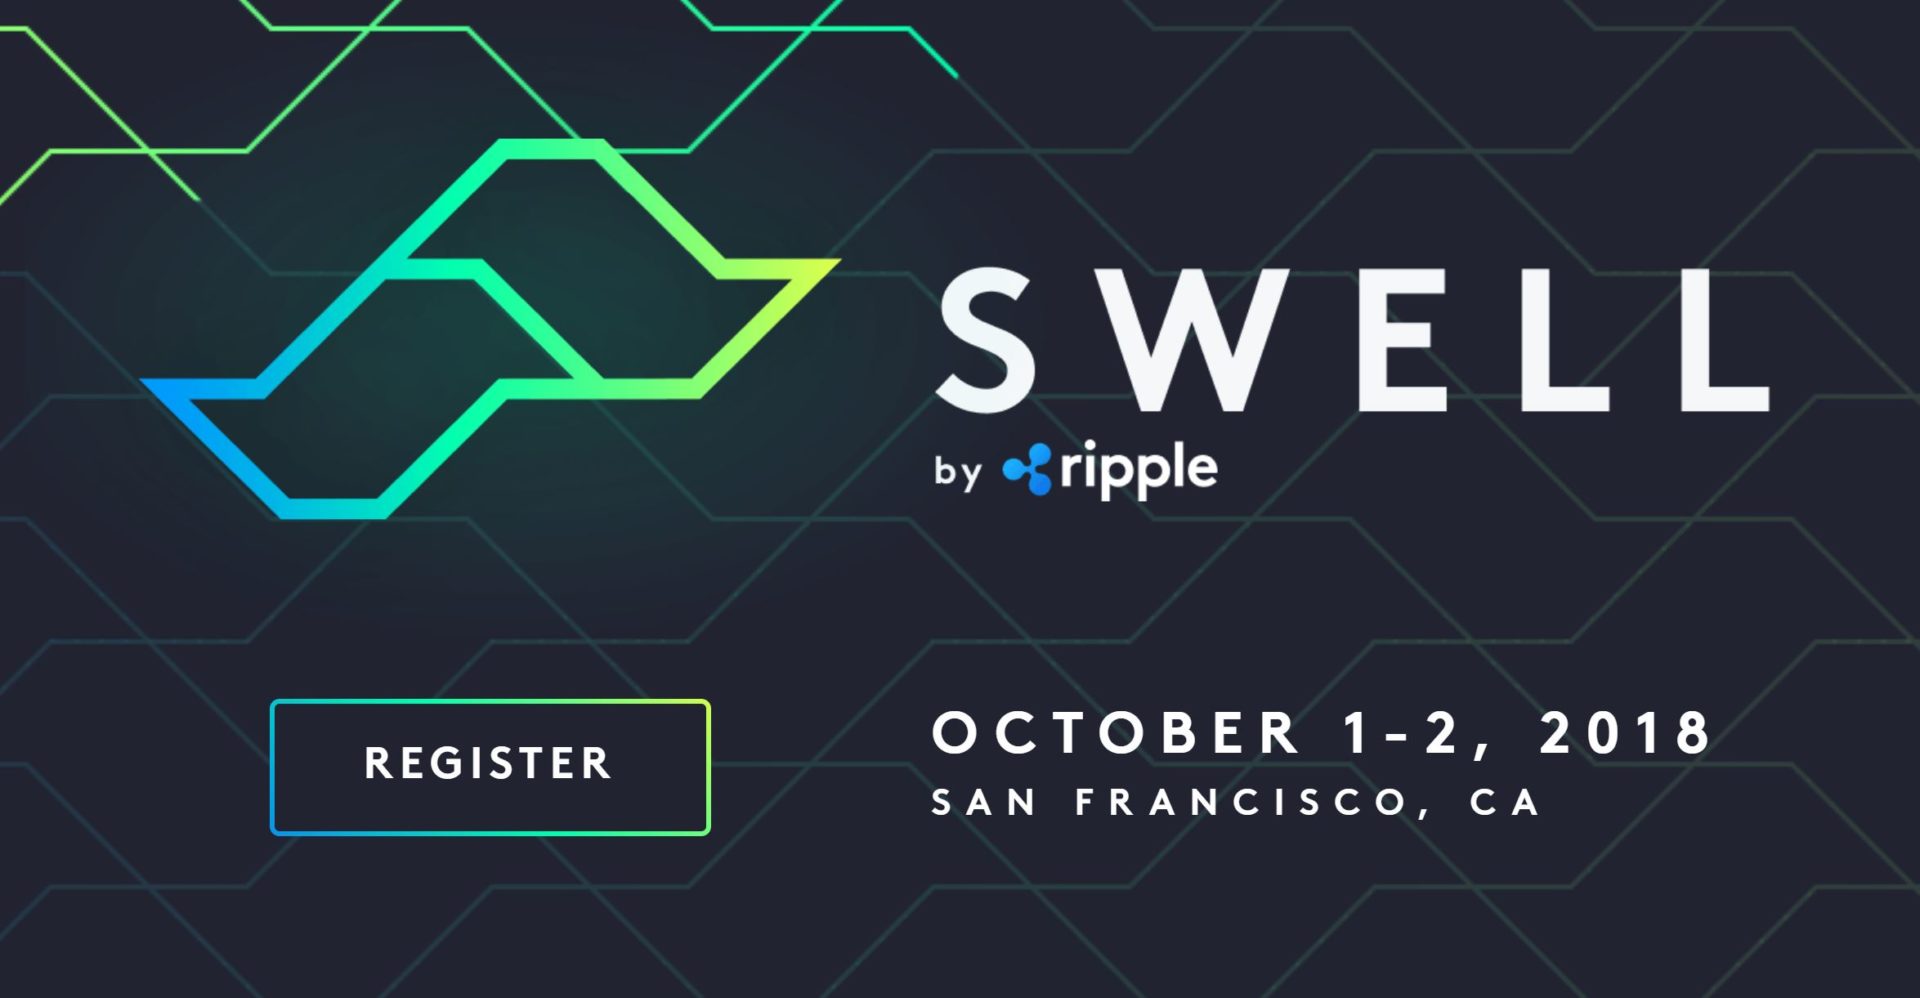 Will The Swell Event Usher in a New Era For XRP in the Markets? 10